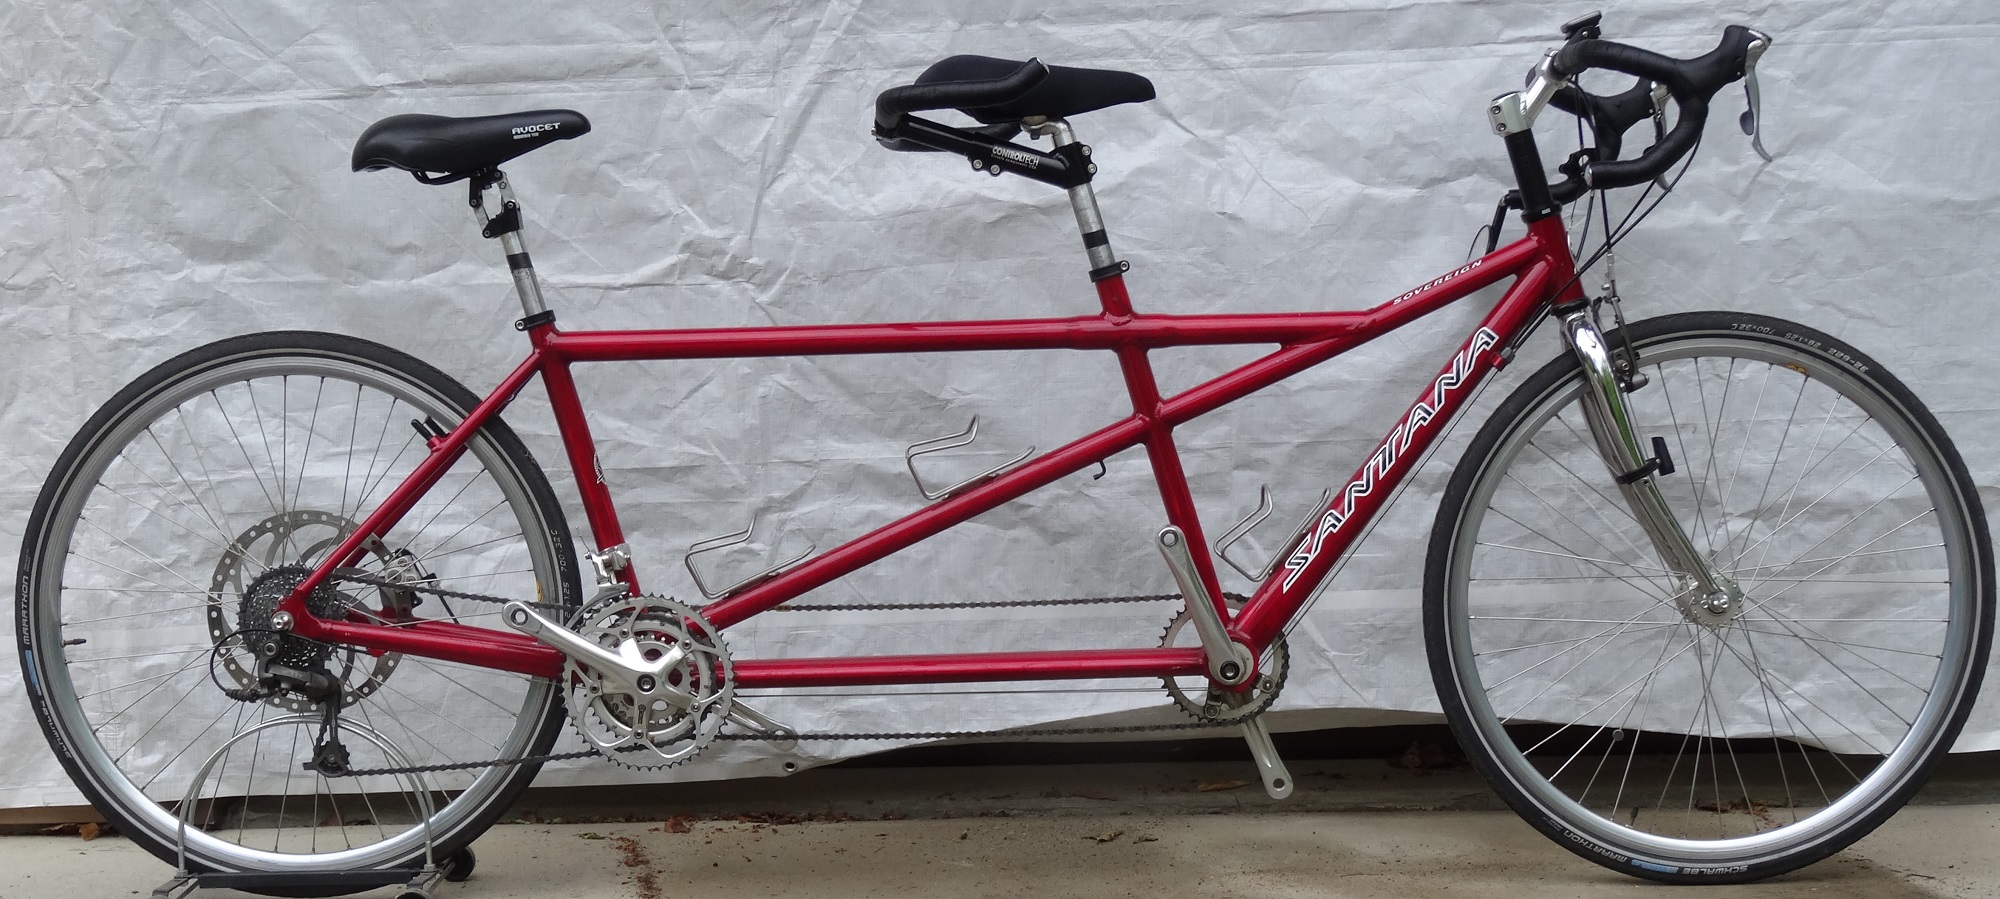 used tandem bikes for sale